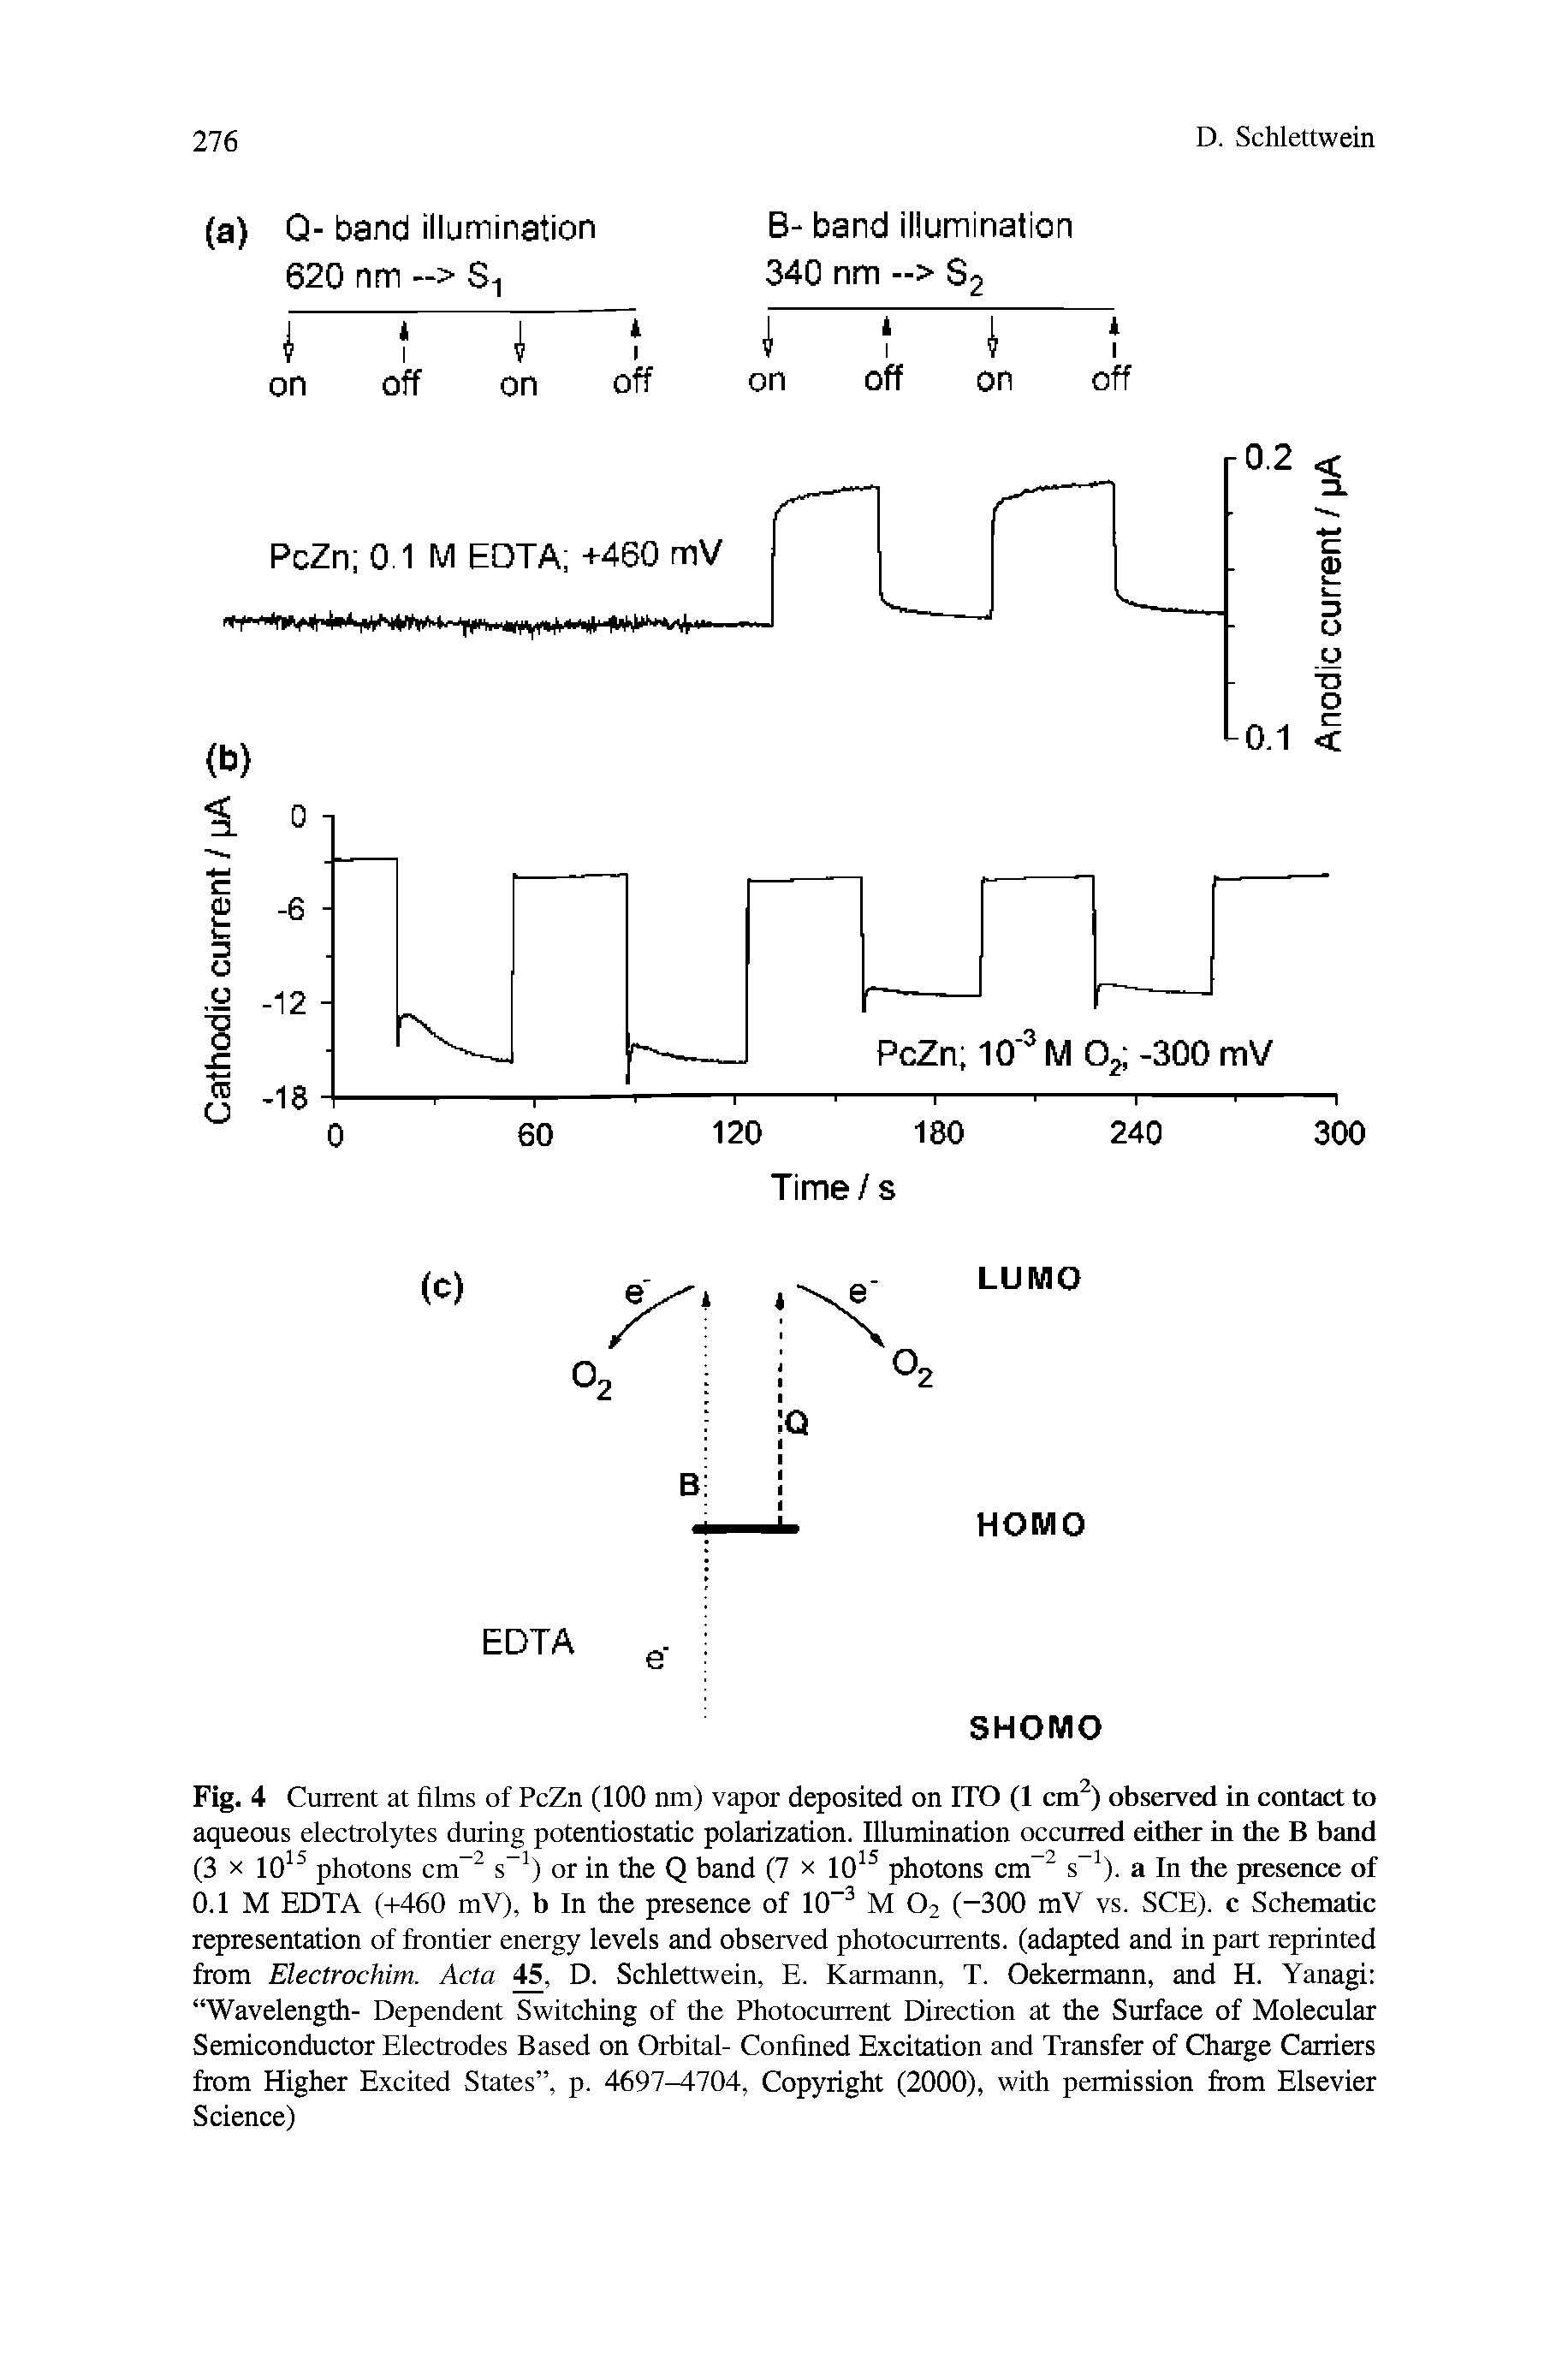 Fig. 4 Current at films of PcZn (100 nm) vapor deposited on ITO (1 cm ) observed in contact to aqueous electrolytes during potentiostatic polarization. Illumination occurred either in the B band (3 X 10 photons cm s ) or in the Q band (7 x 10 photons cm s ). a In the presence of 0.1 M EDTA (+460 mV), b In the presence of 10 M O2 (-300 mV vs. SCE). c Schematic representation of frontier energy levels and observed photocurrents, (adapted and in part reprinted from Electrochim. Acta D. Schlettwein, E. Karmann, T. Oekermann, and H. Yanagi Wavelength- Dependent Switching of the Photocurrent Direction at the Surface of Molecular Semiconductor Electrodes Based on Orbital- Confined Excitation and Transfer of Charge Carriers from Higher Excited States , p. 4697 704, Copyright (2000), with permission from Elsevier Science)...